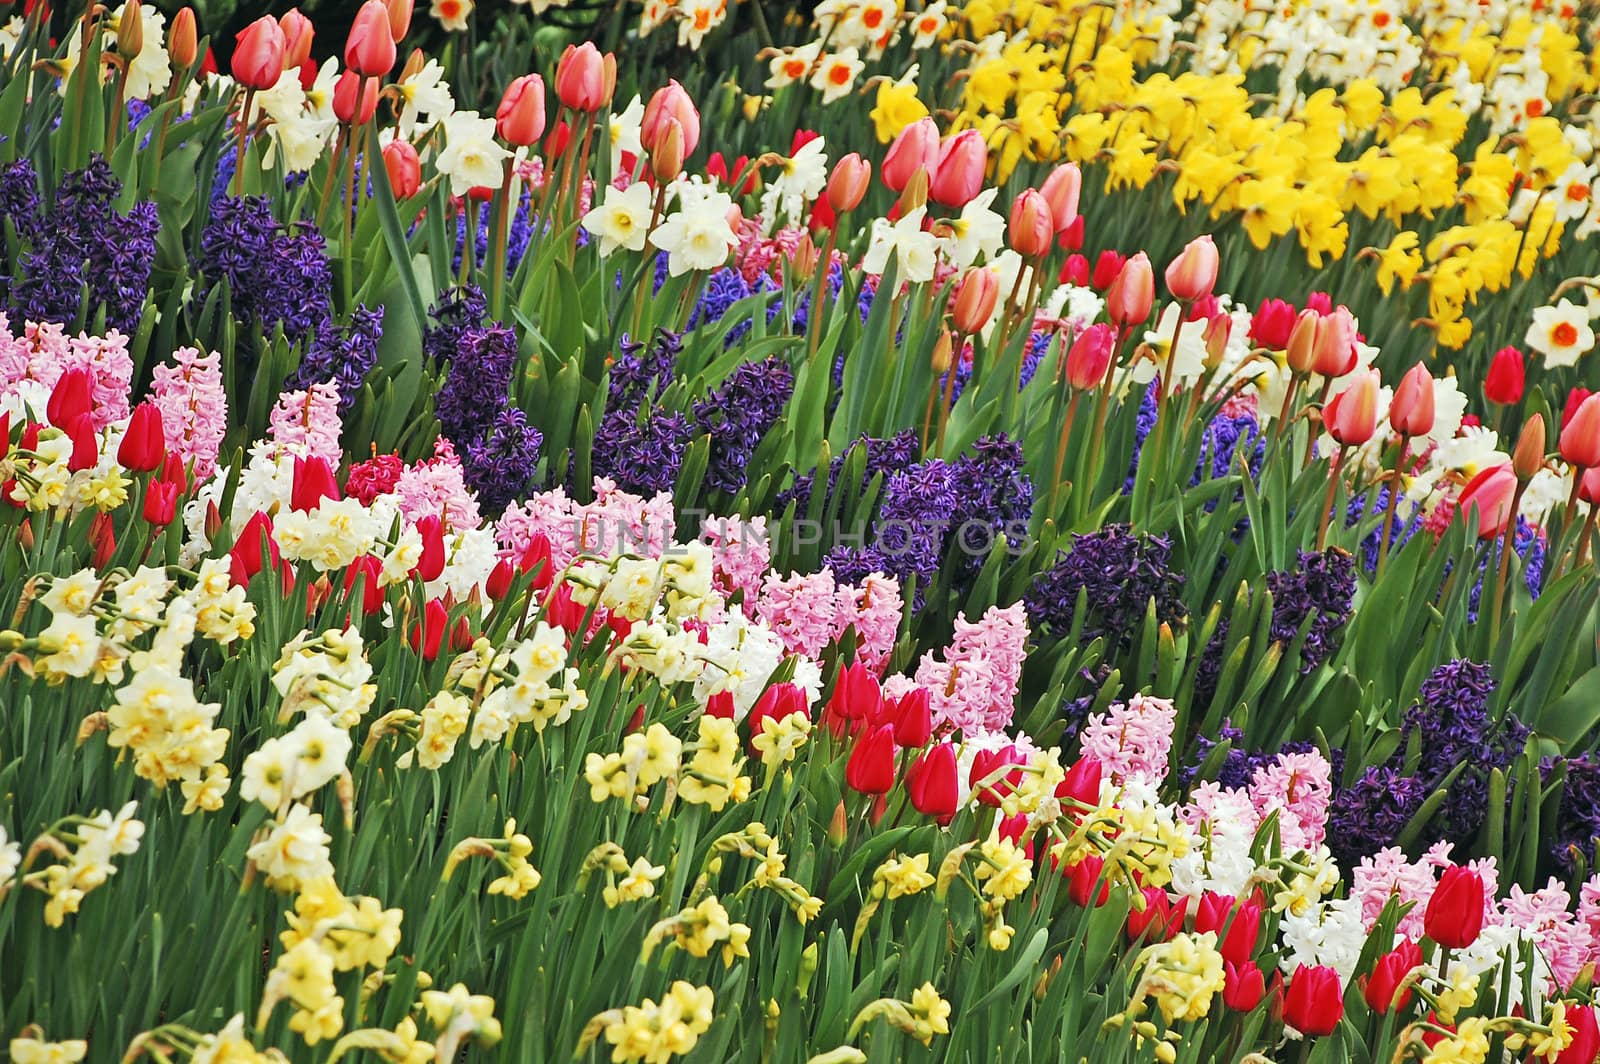 Rows of tulips, daffodils and hyacinth